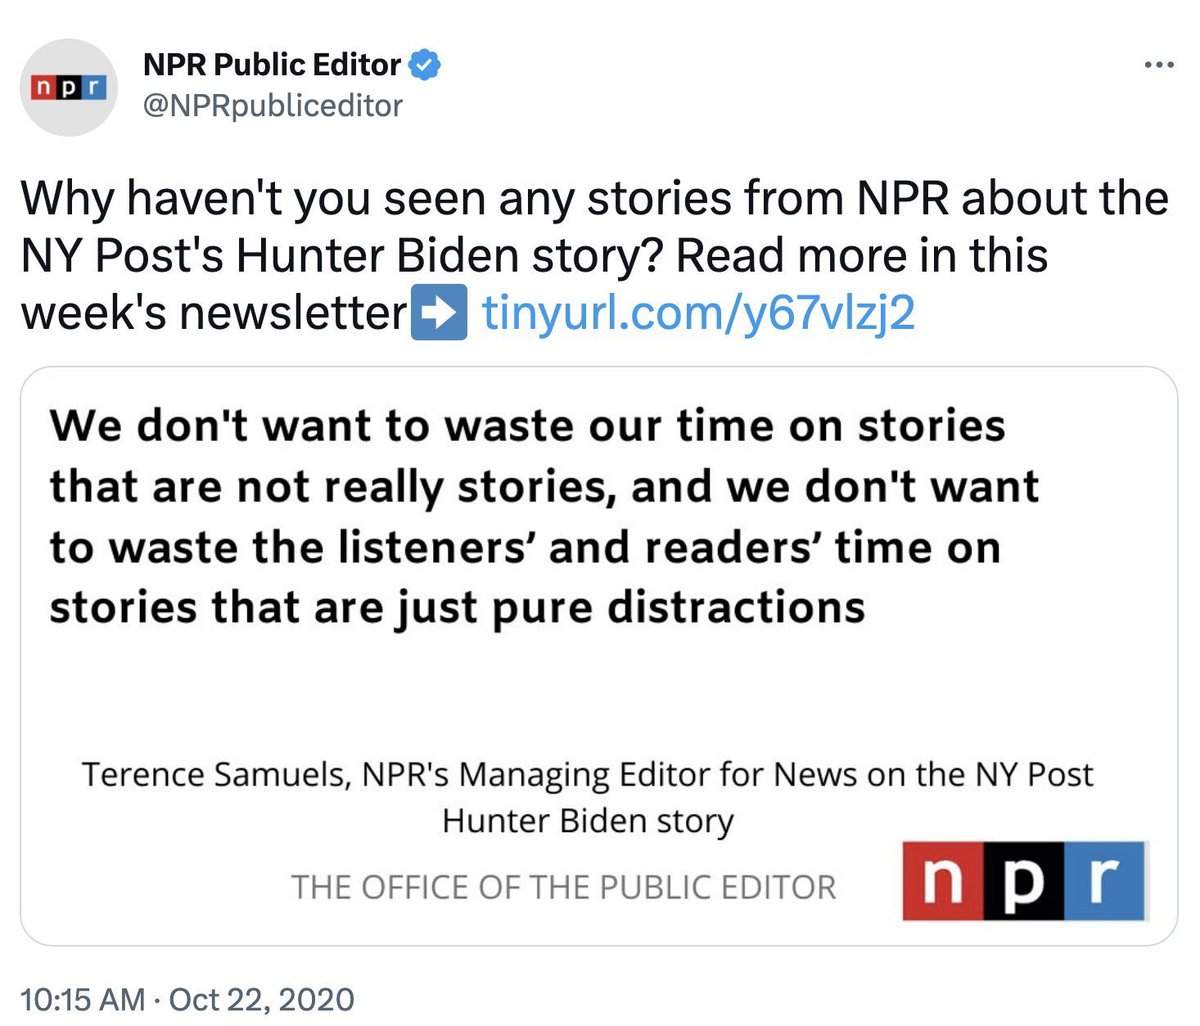 Remember when NPR posted this? Defund NPR.